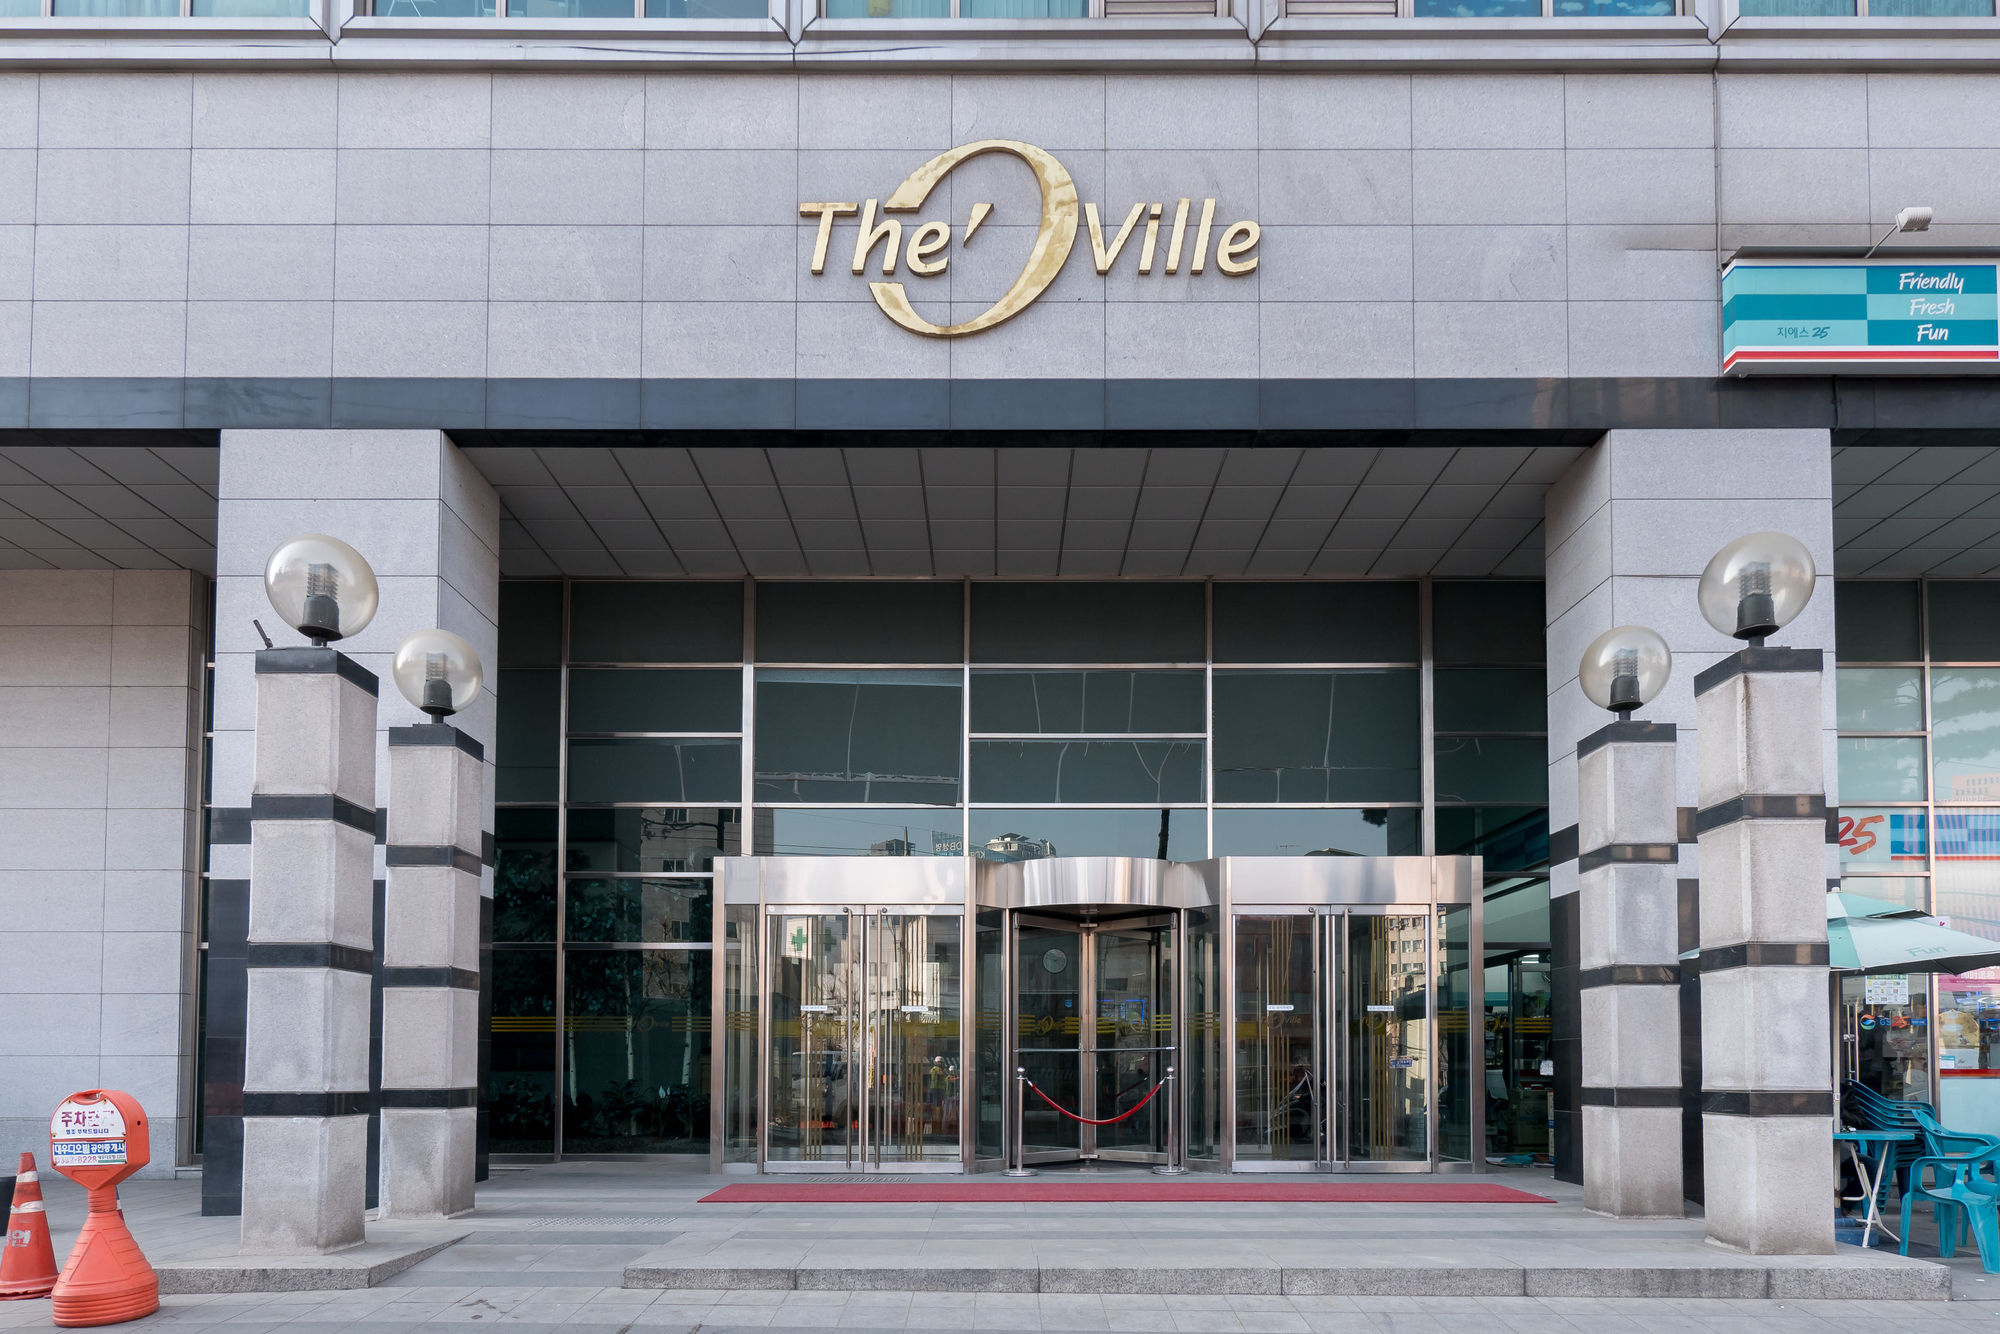 Family Oville Suite Seoul Station Exterior photo